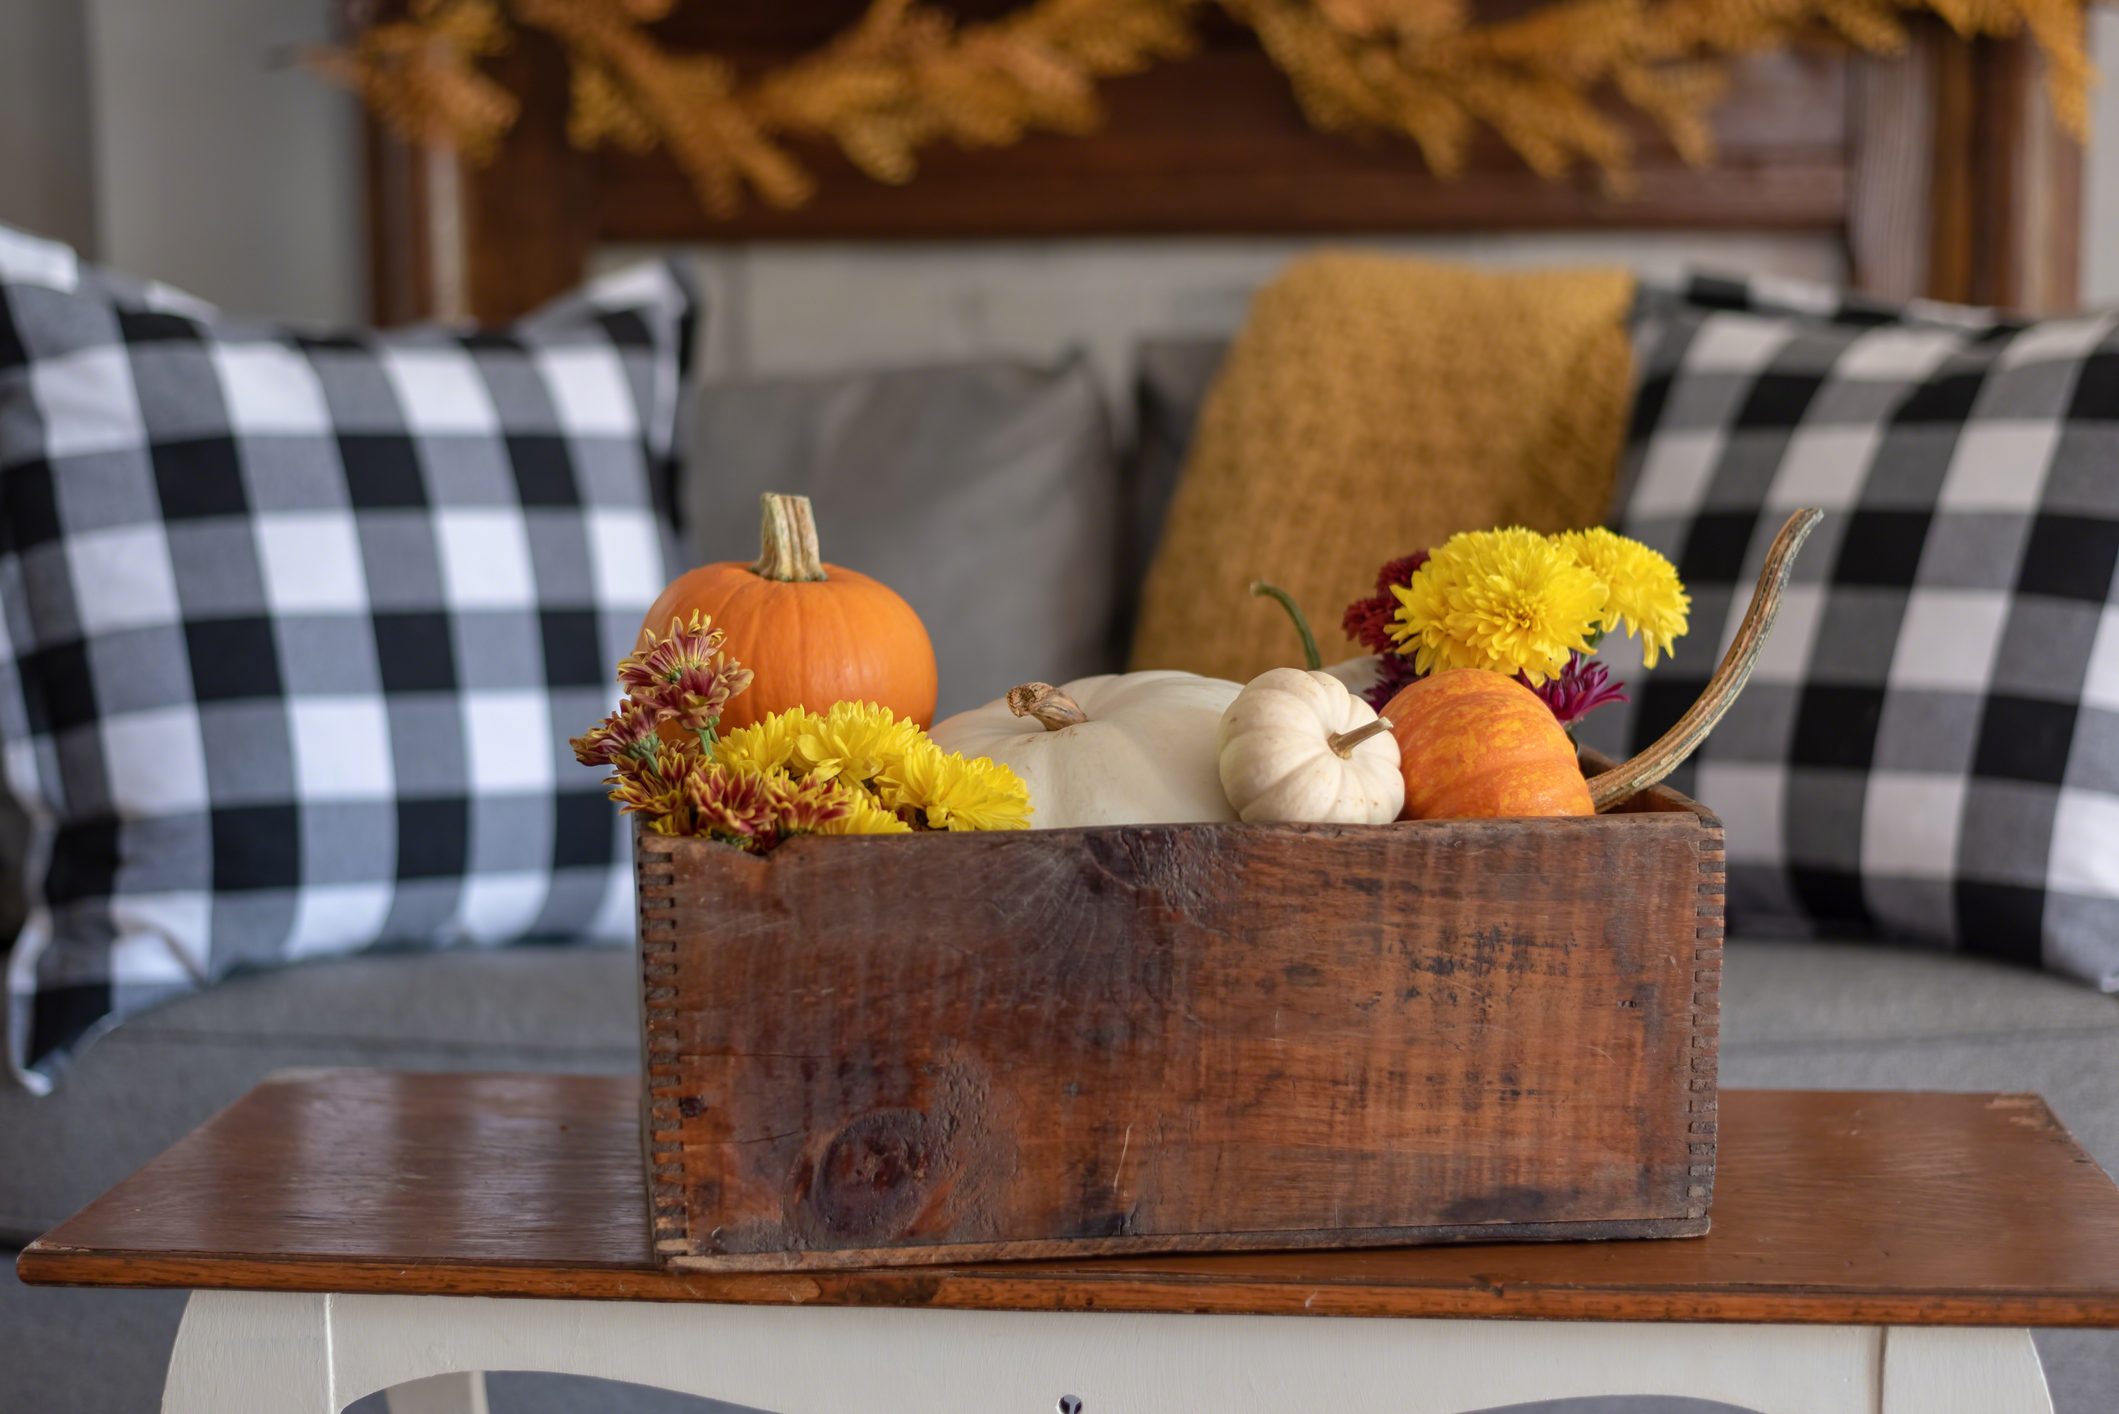 Vintage wooden crate filled with pumpkins and autumn flowers on a coffee table; couch with gingham pillows and a yellow throw blanket in the background